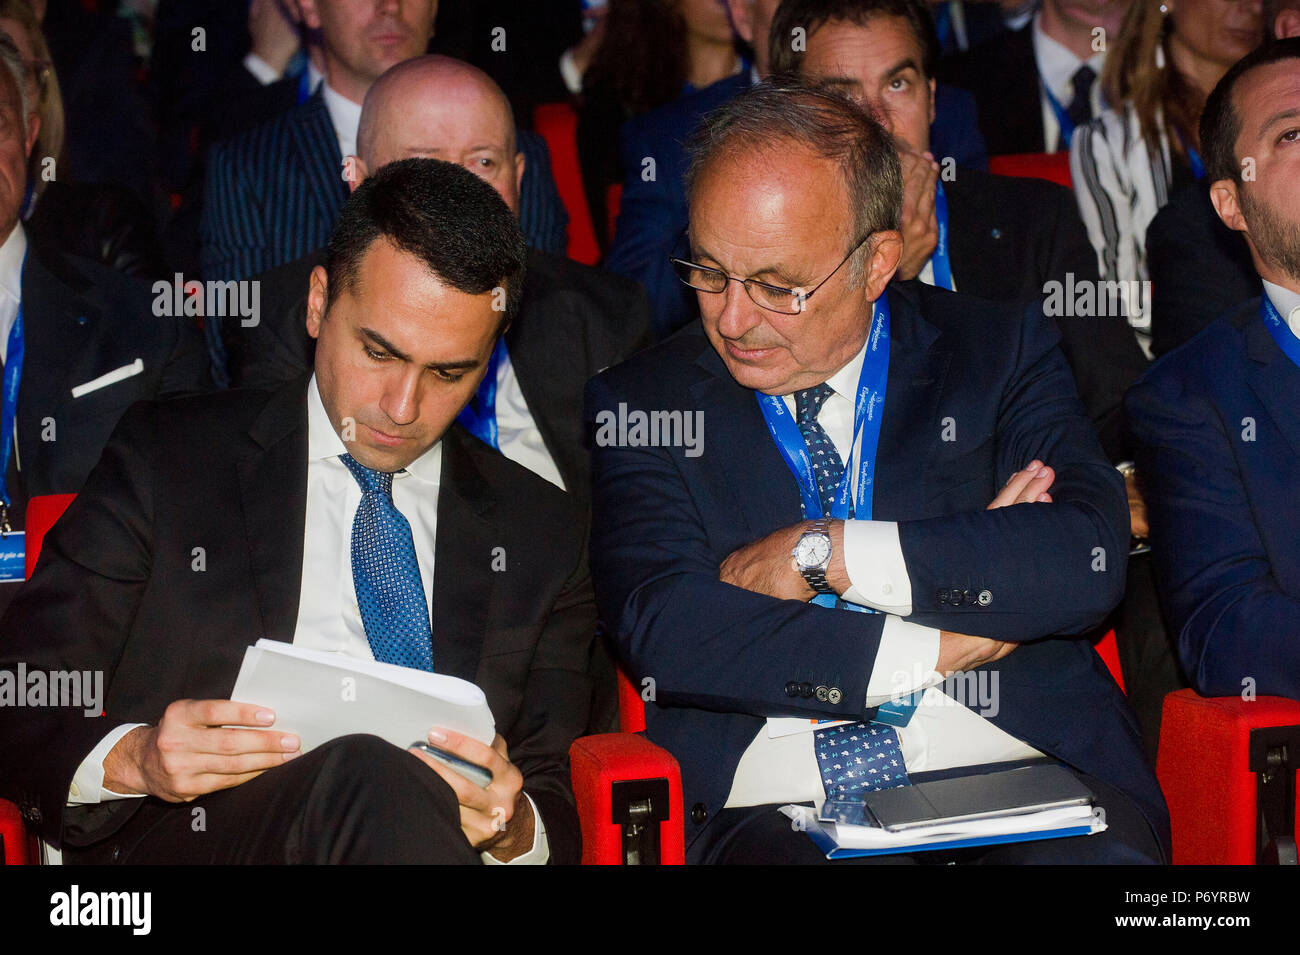 taly, Rome, Confartigianato Assembly: Luigi Di Maio, Leader of Five Star Movement (M5S), Vice-President of the Council of Ministers in talks with Cesa Stock Photo